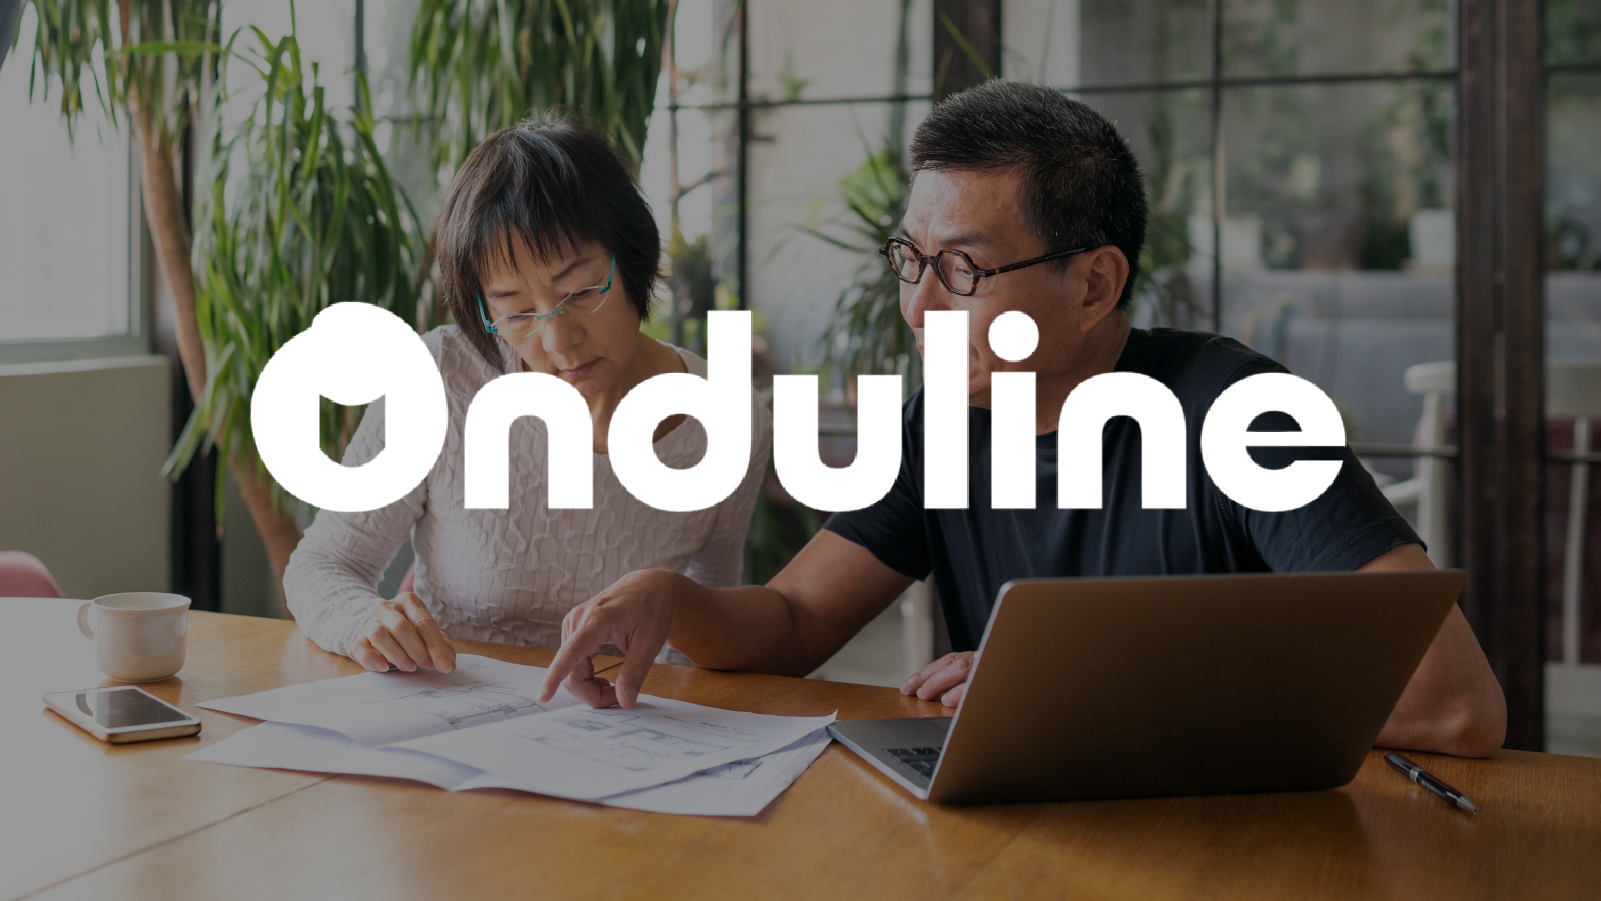 Onduline logo overlayed over two coworkers working together at a desk